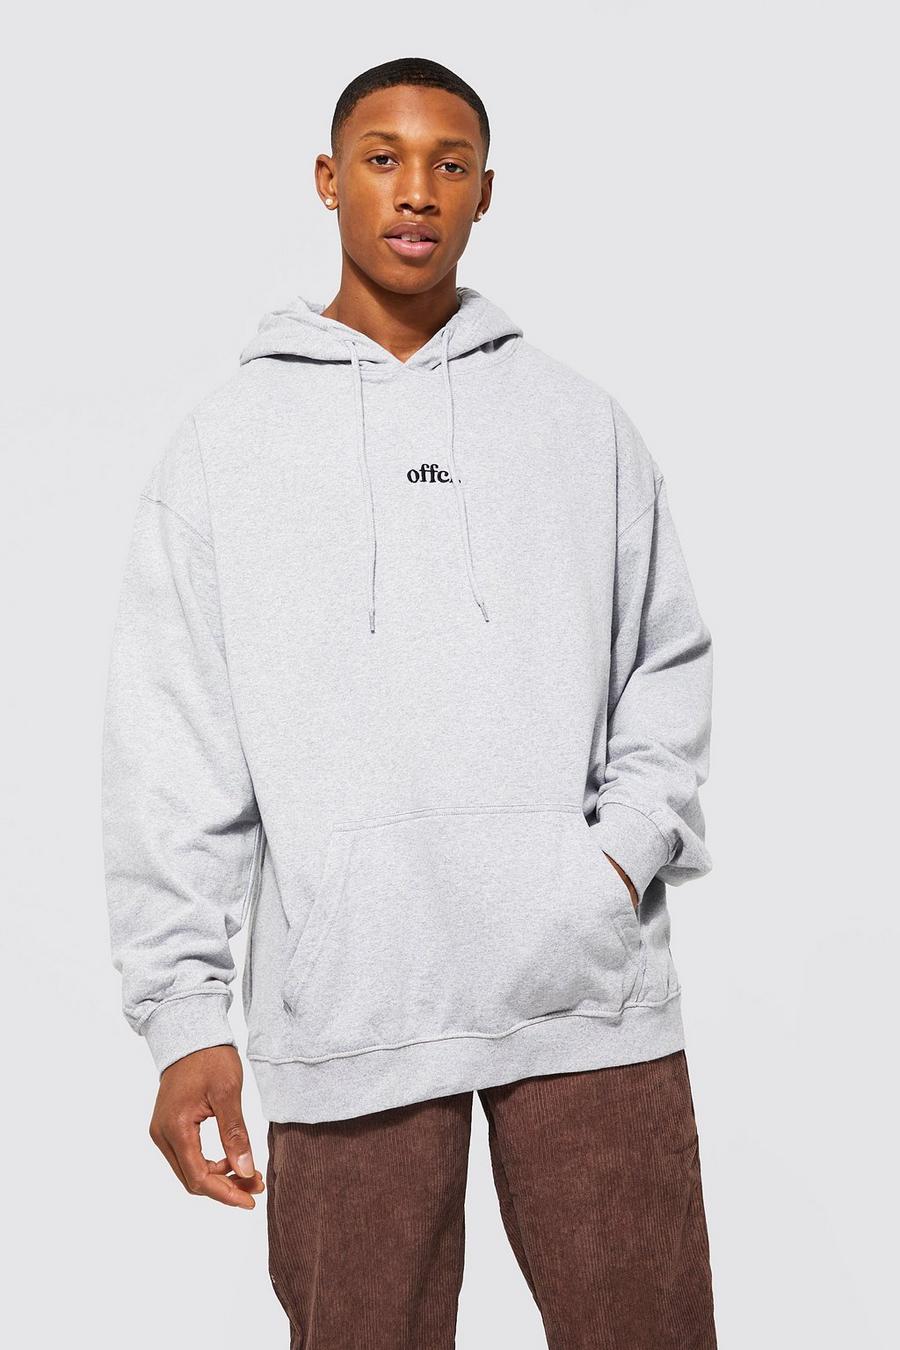 Grey Offcl Oversized Over The Head Hoodie image number 1